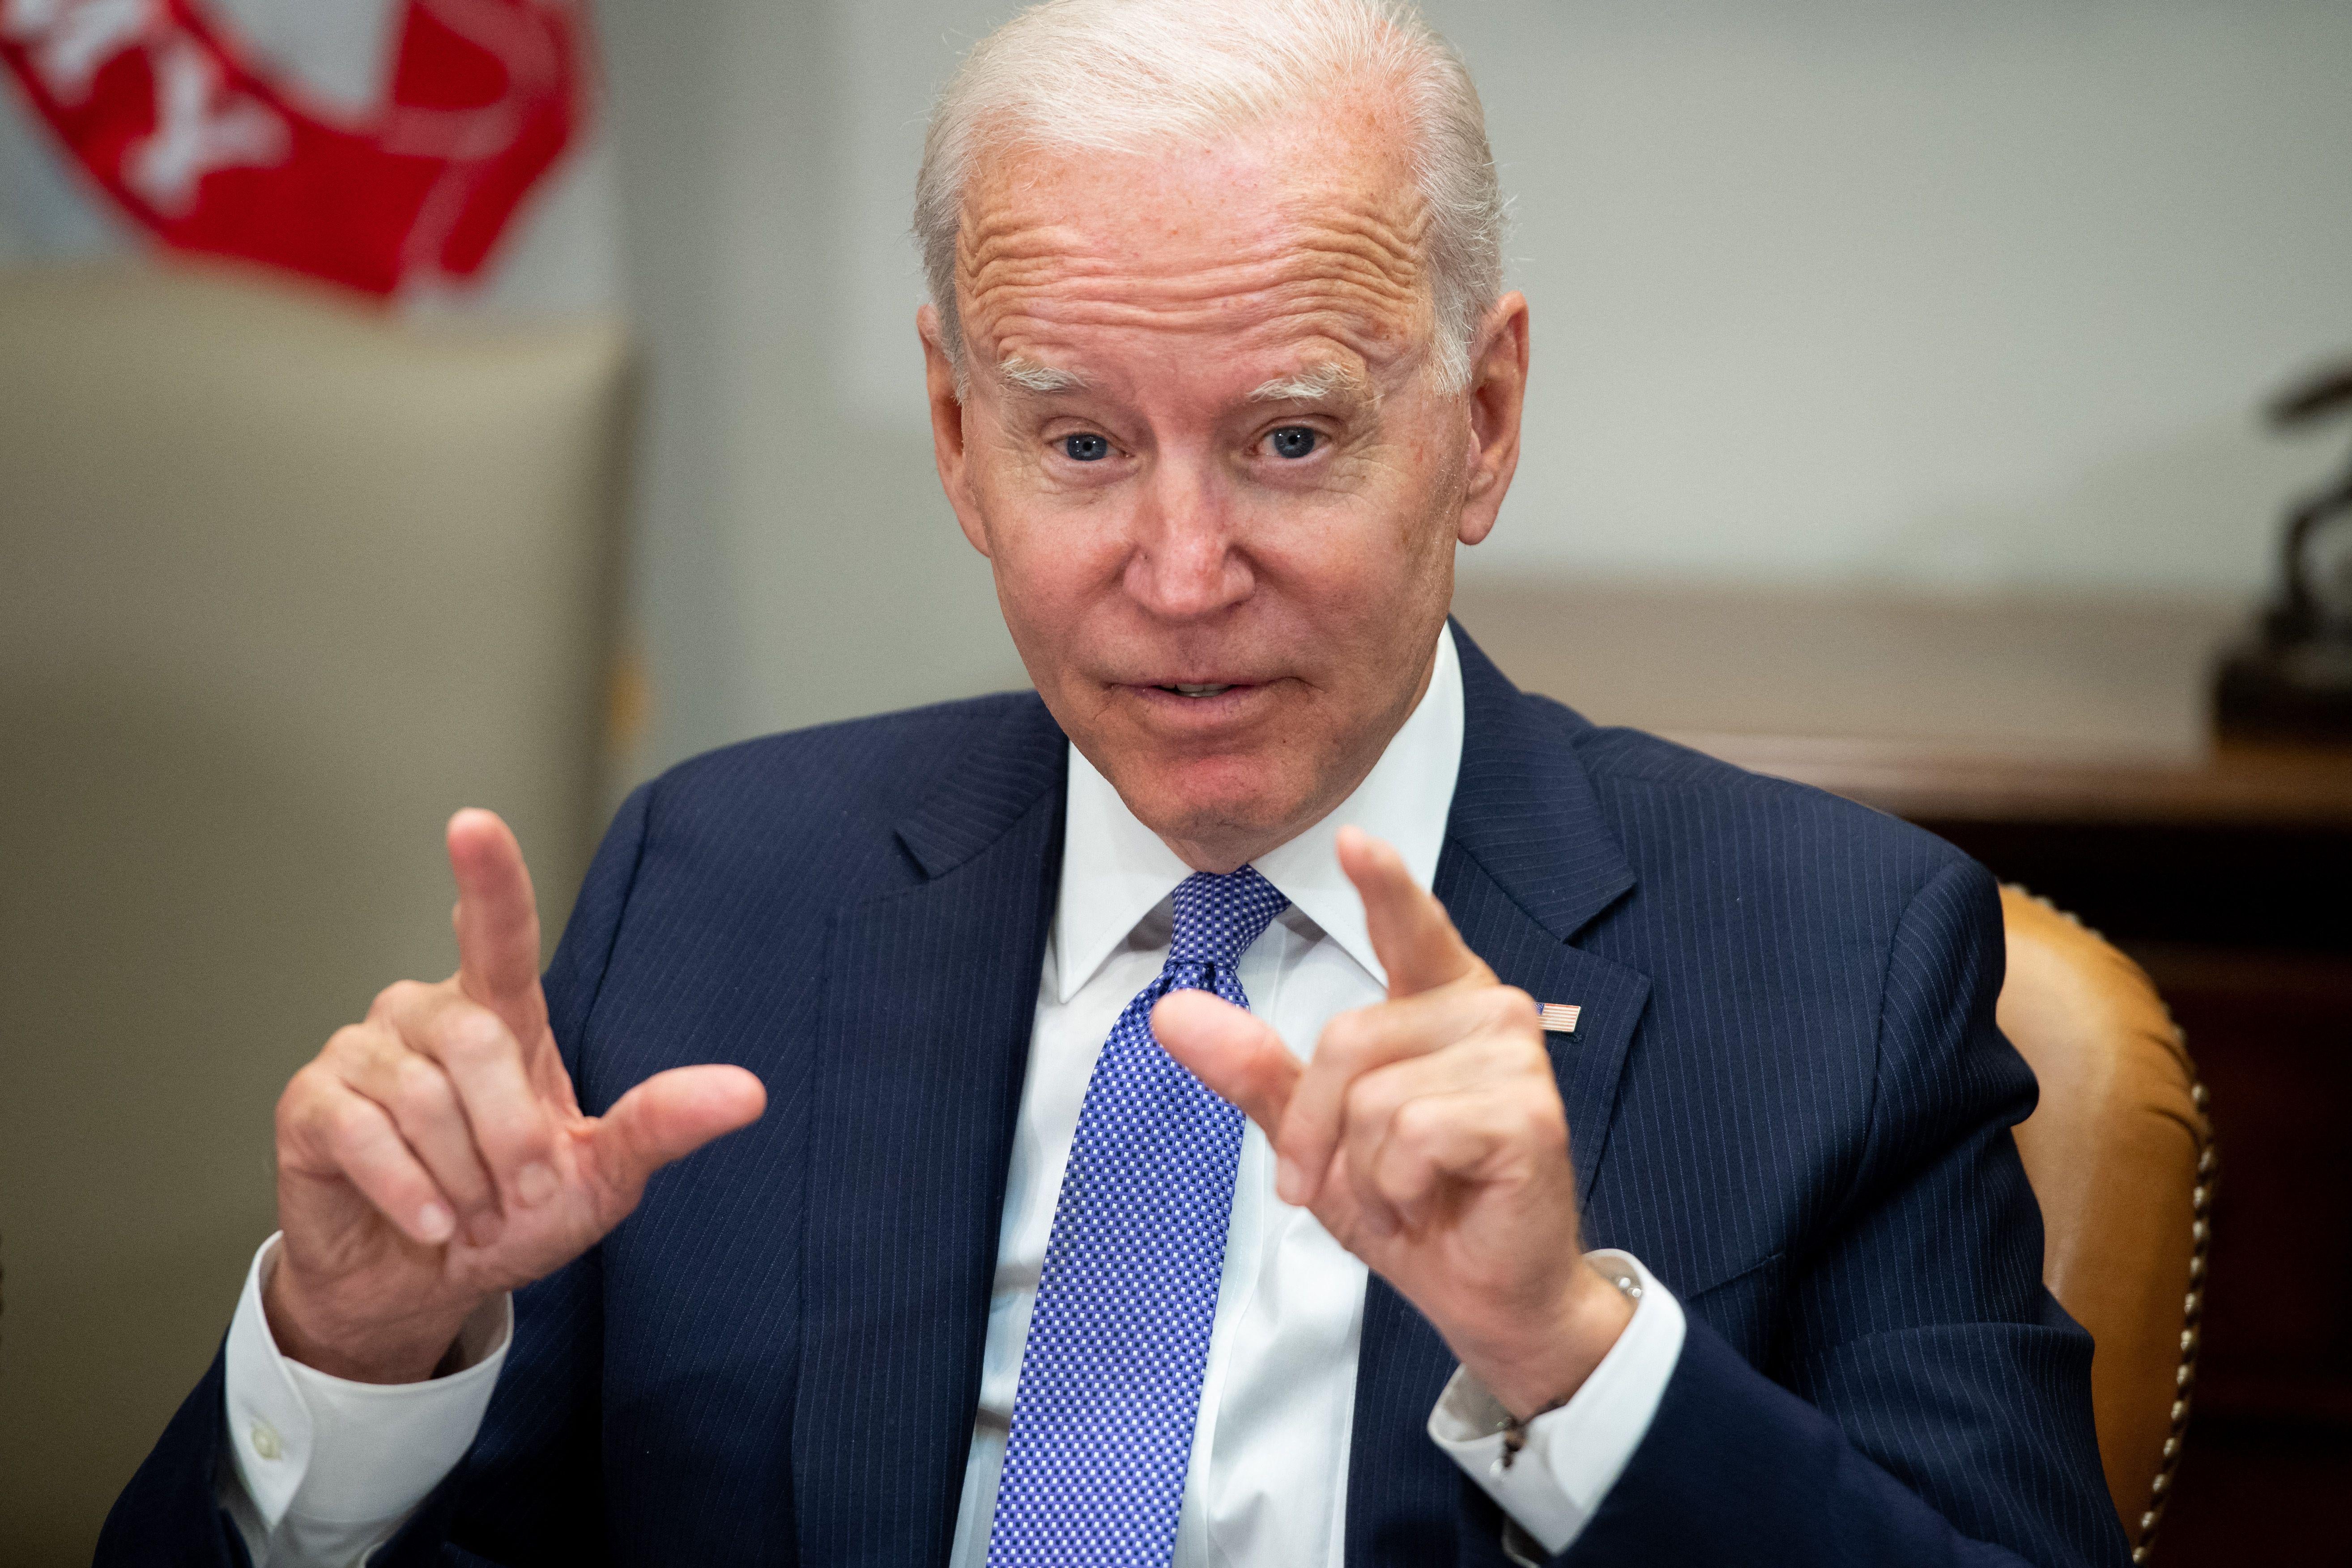 Biden sitting in the Roosevelt Room of the White House pointing both index fingers as he speaks